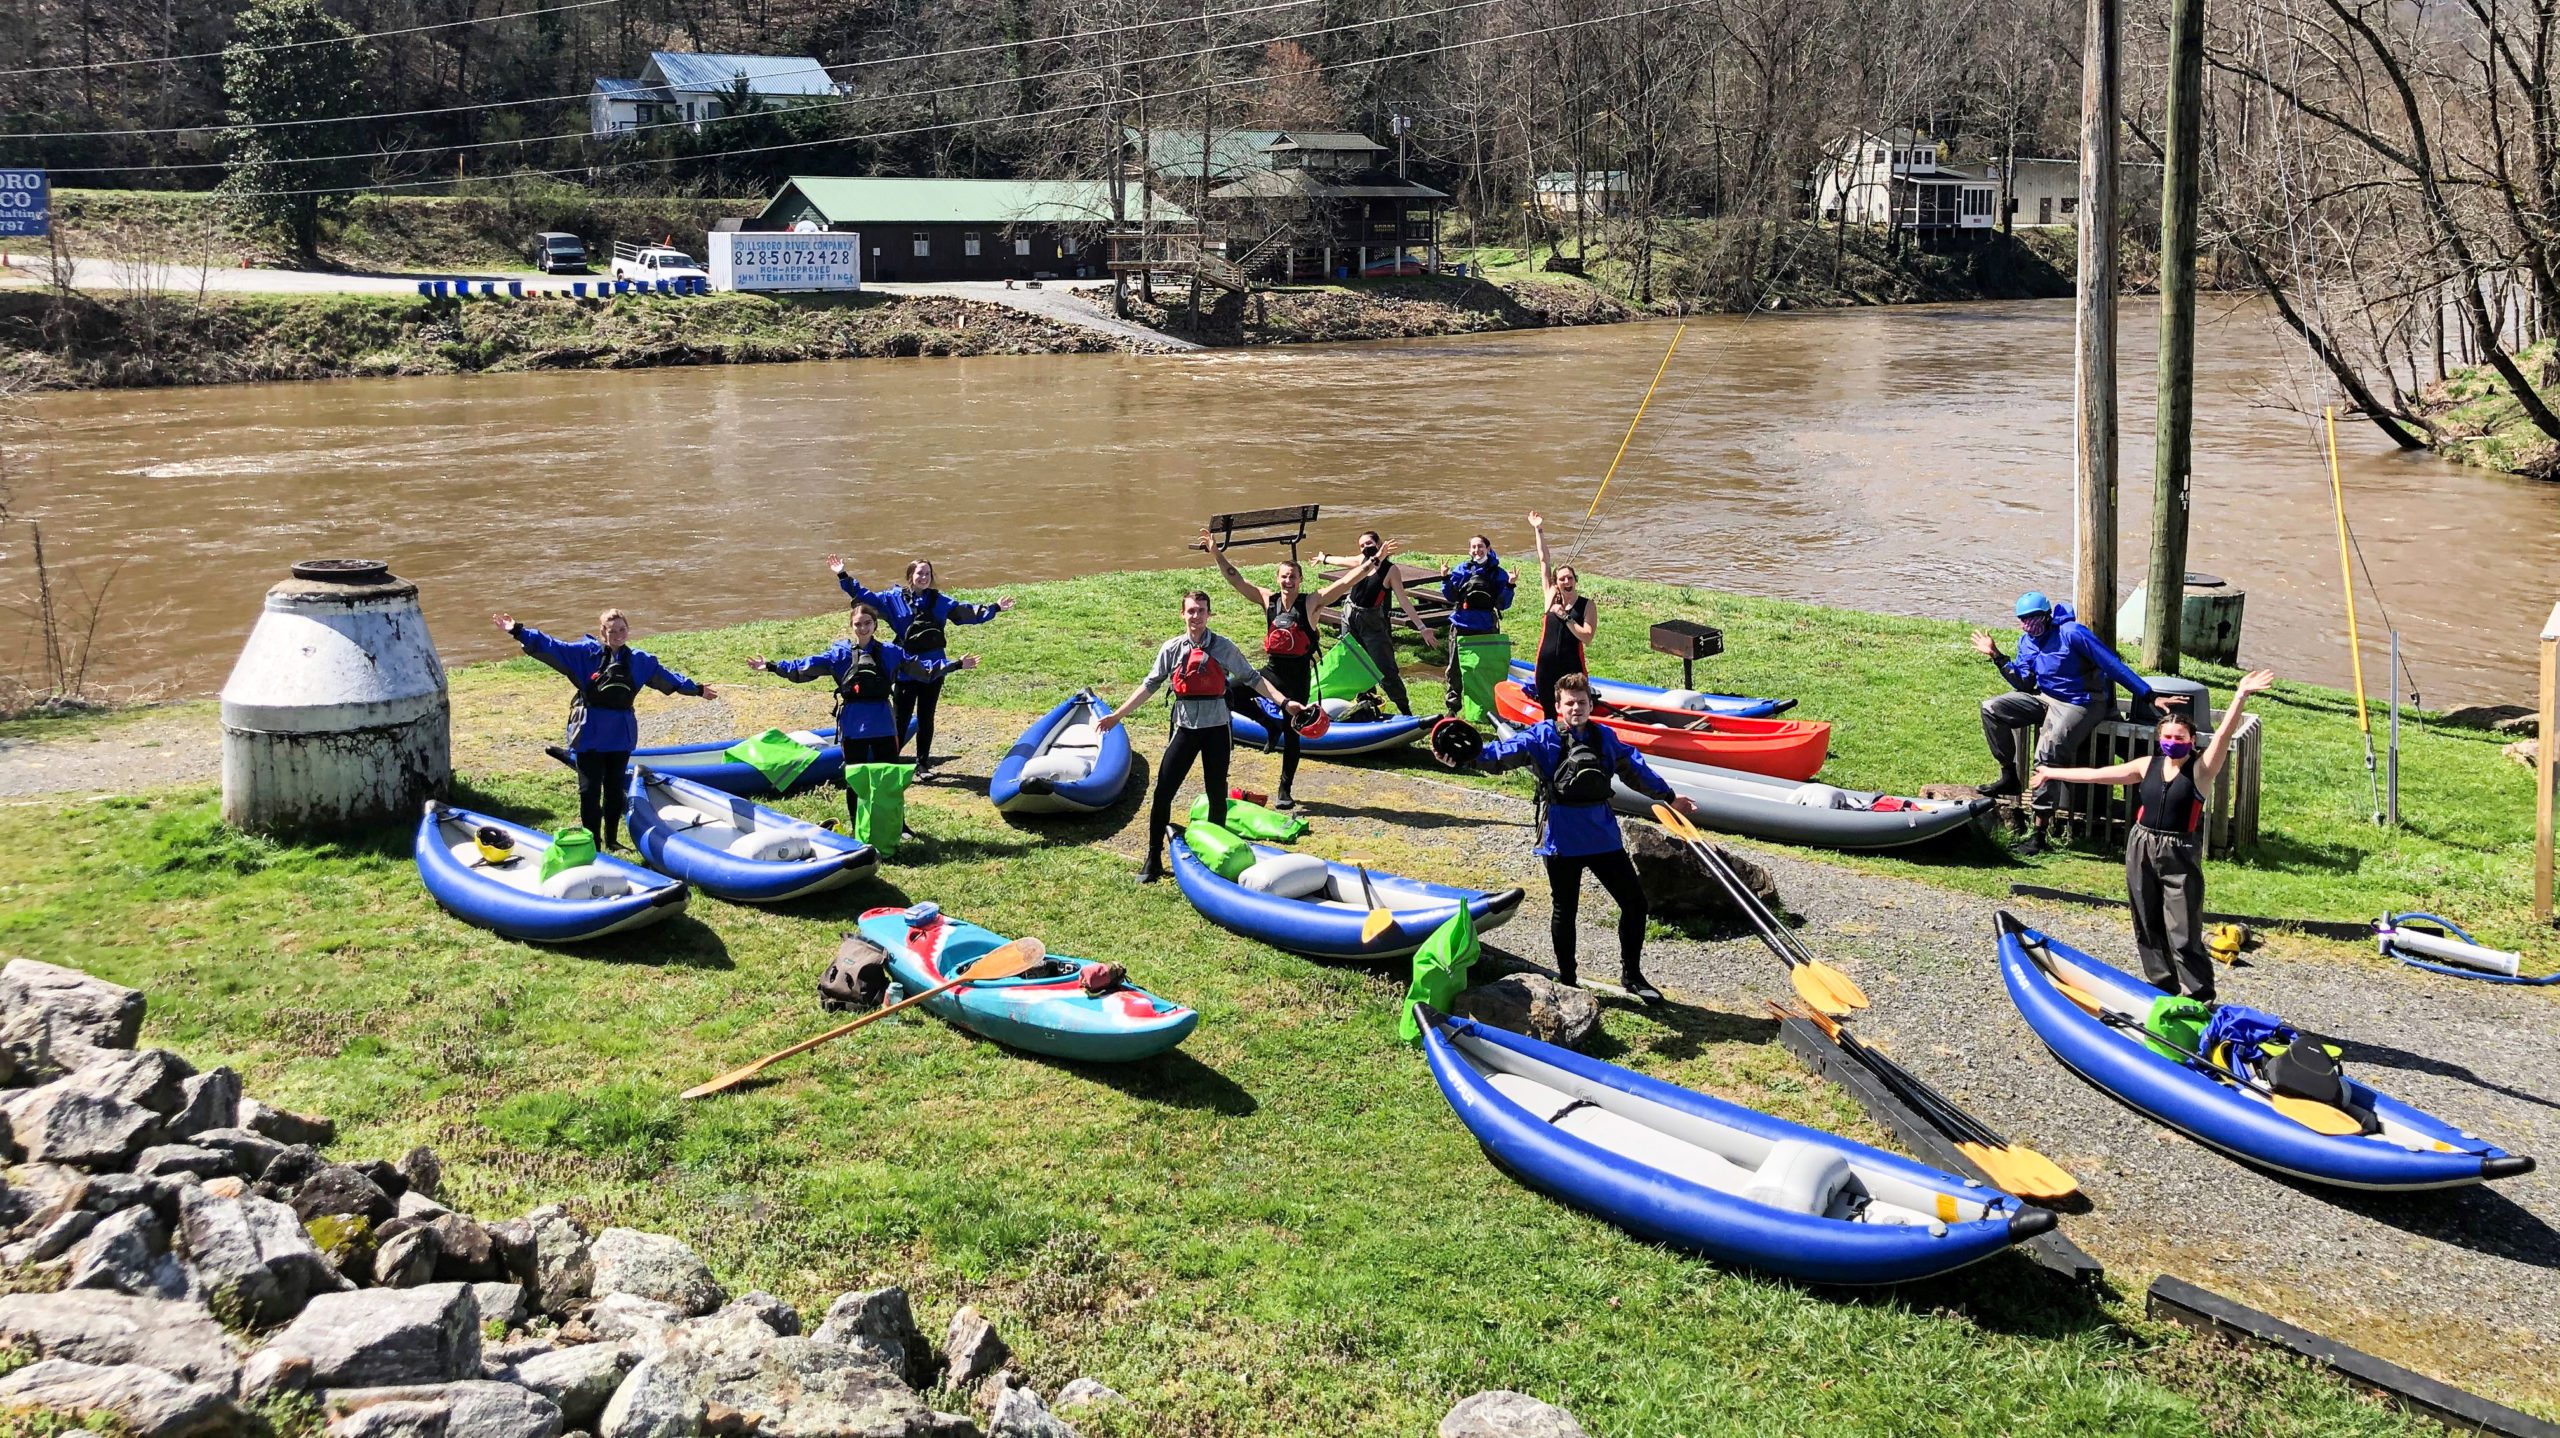 Clemson students traveled to North Carolina and went whitewater paddling on the Tuckasegee River in March 2021